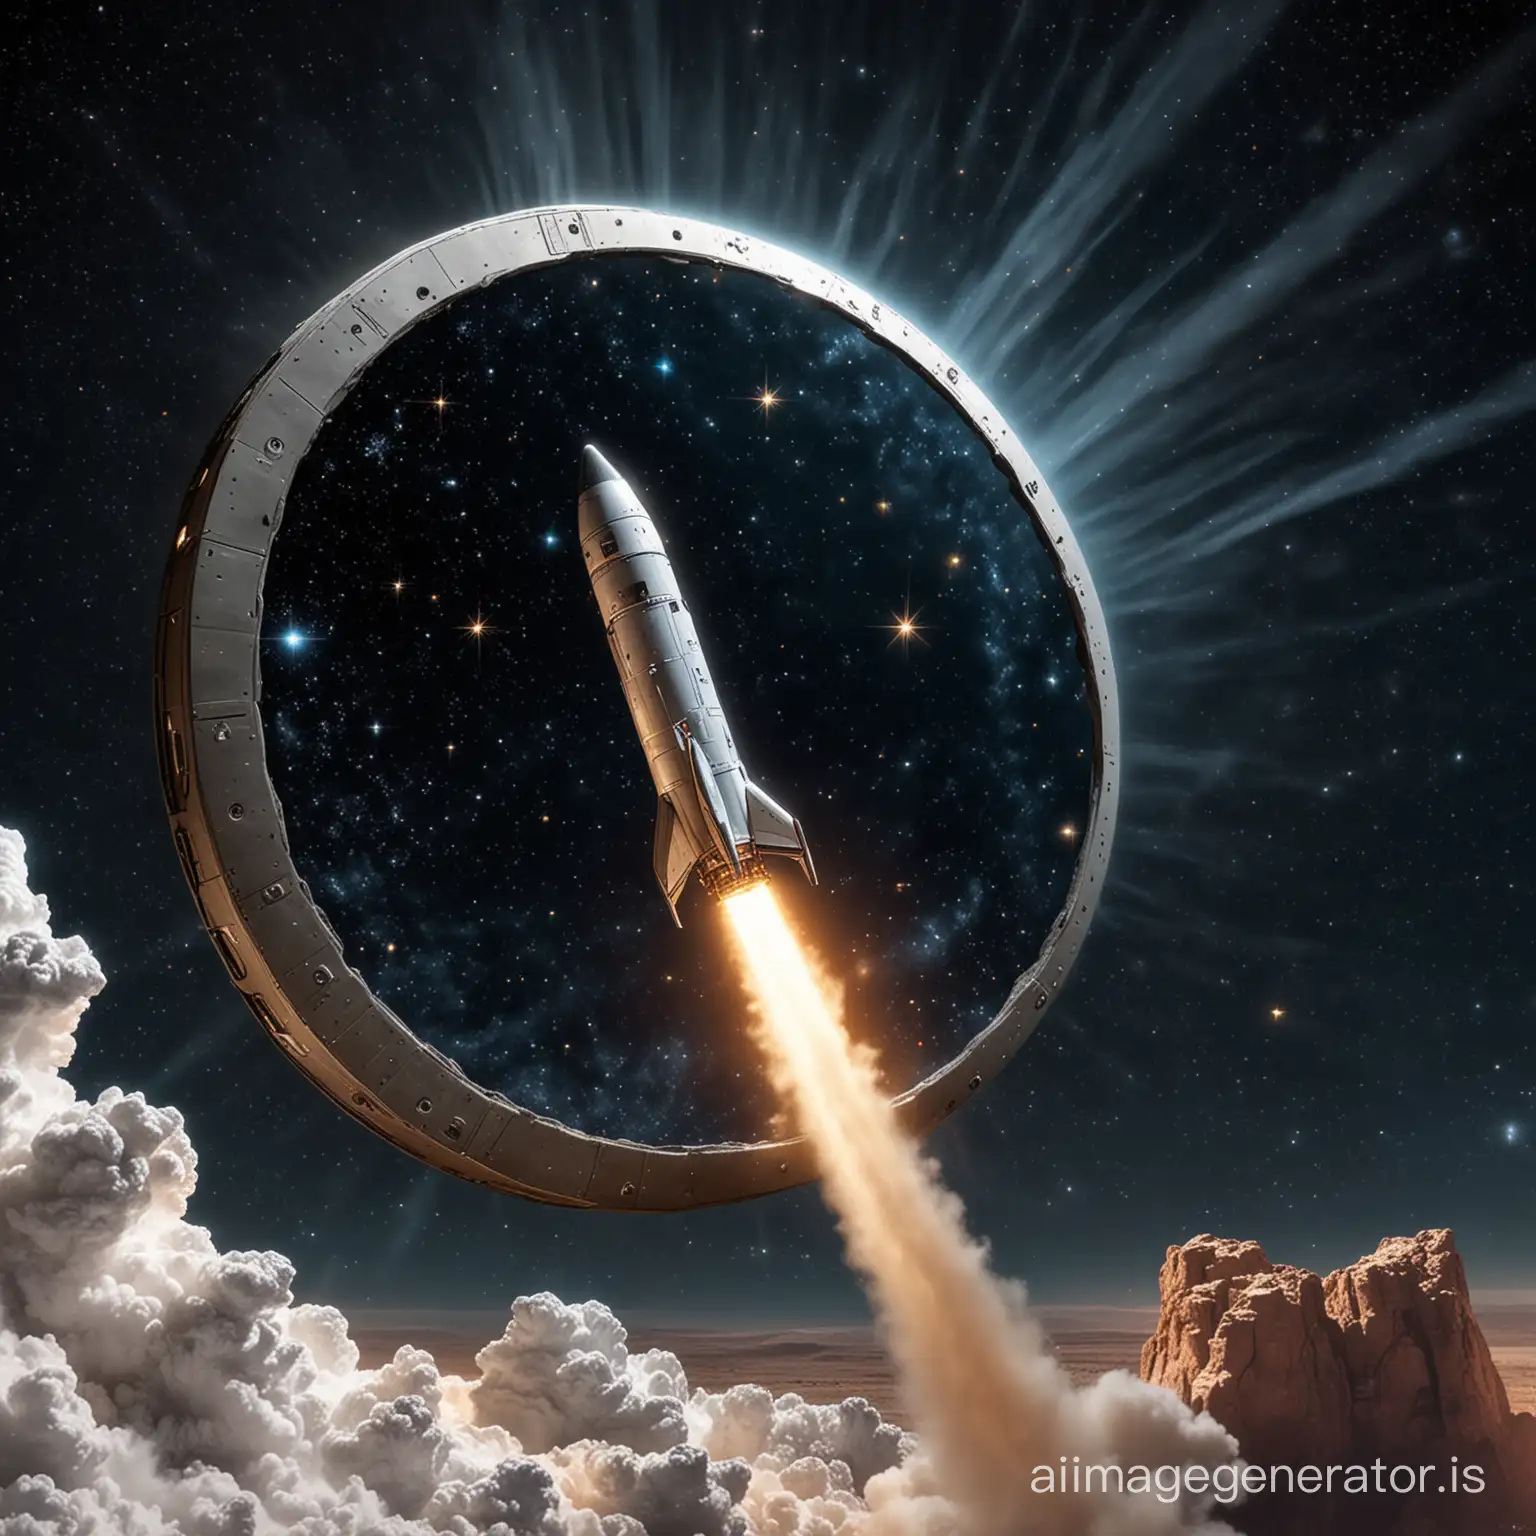 Futuristic-Rocket-with-Comet-Coin-Emblem-Soaring-Through-Starry-Sky